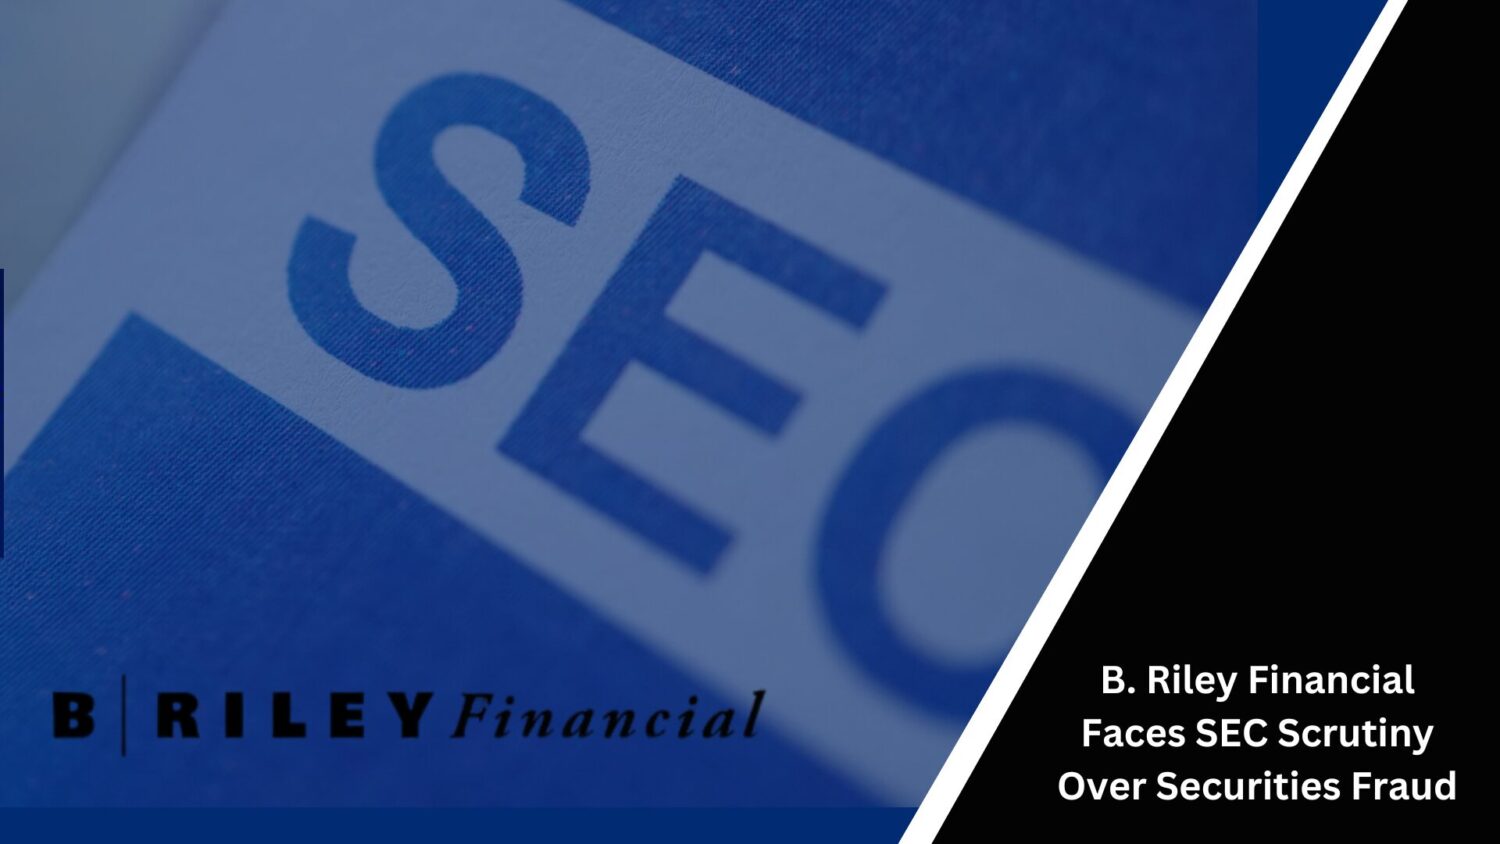 B. Riley Financial Faces Sec Scrutiny Over Securities Fraud